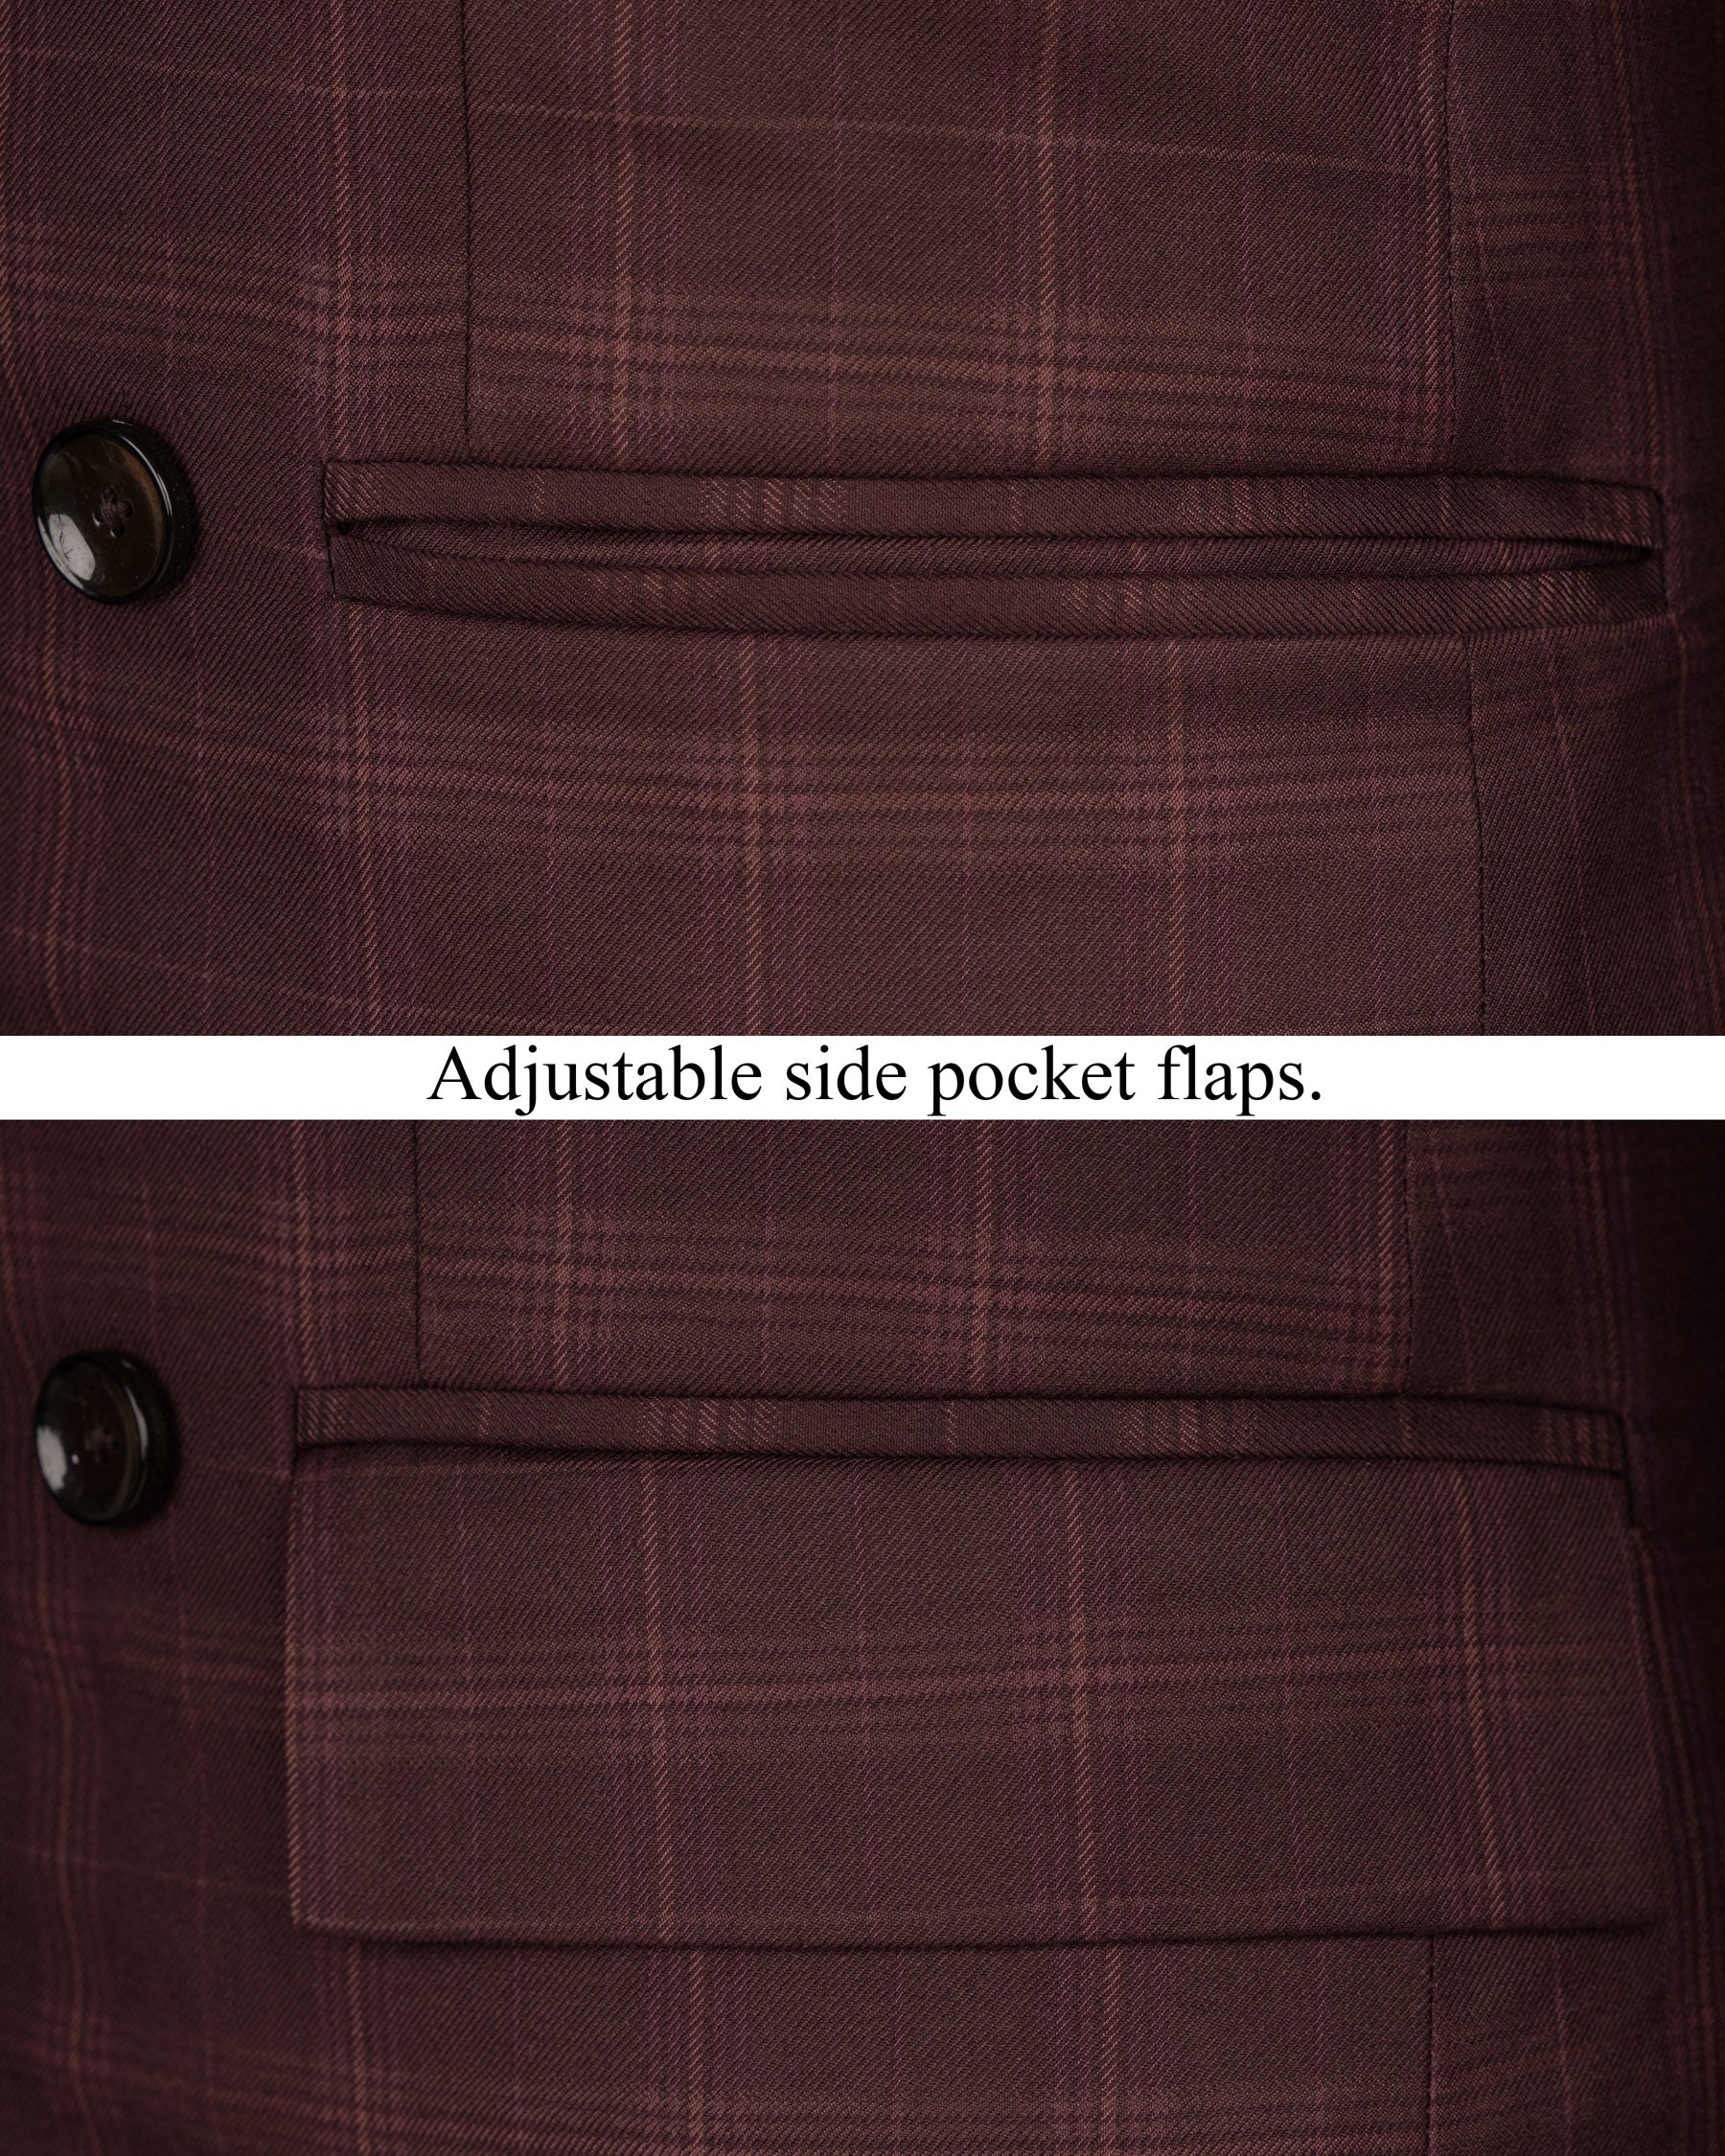 Crater Brown Super fine Plaid Double Breasted Wool Rich BlazerBL1607-DB-36, BL1607-DB-38, BL1607-DB-40, BL1607-DB-42, BL1607-DB-44, BL1607-DB-46, BL1607-DB-48, BL1607-DB-50, BL1607-DB-52, BL1607-DB-54, BL1607-DB-56, BL1607-DB-58, BL1607-DB-60